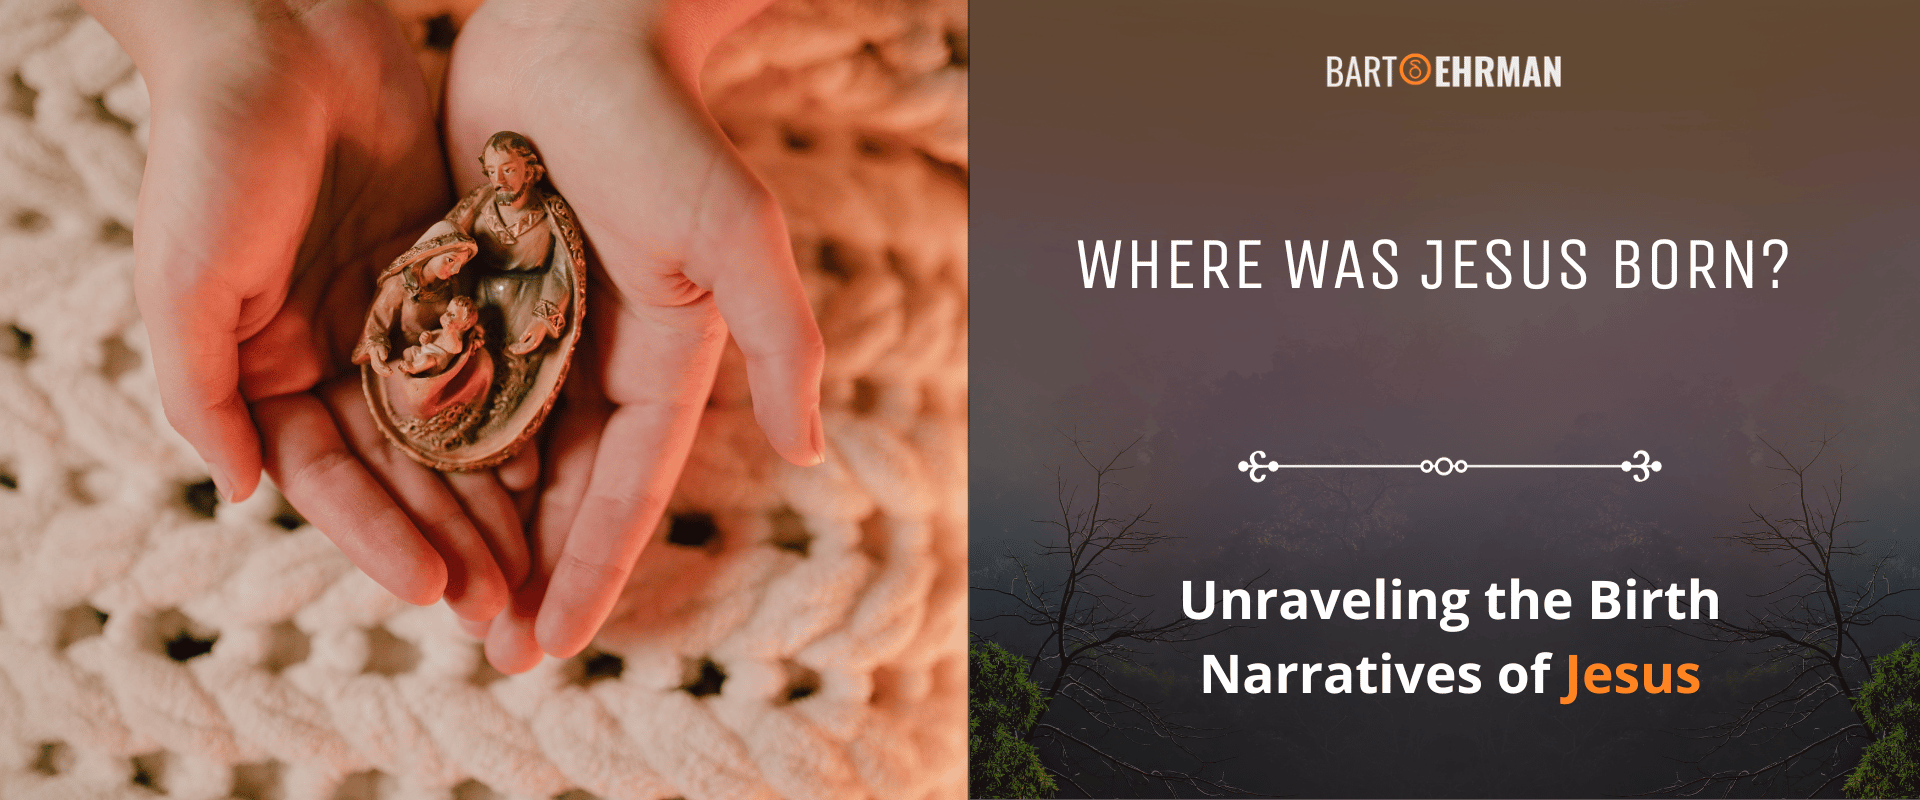 Where Was Jesus Born - Unraveling the Birth Narratives of Jesus